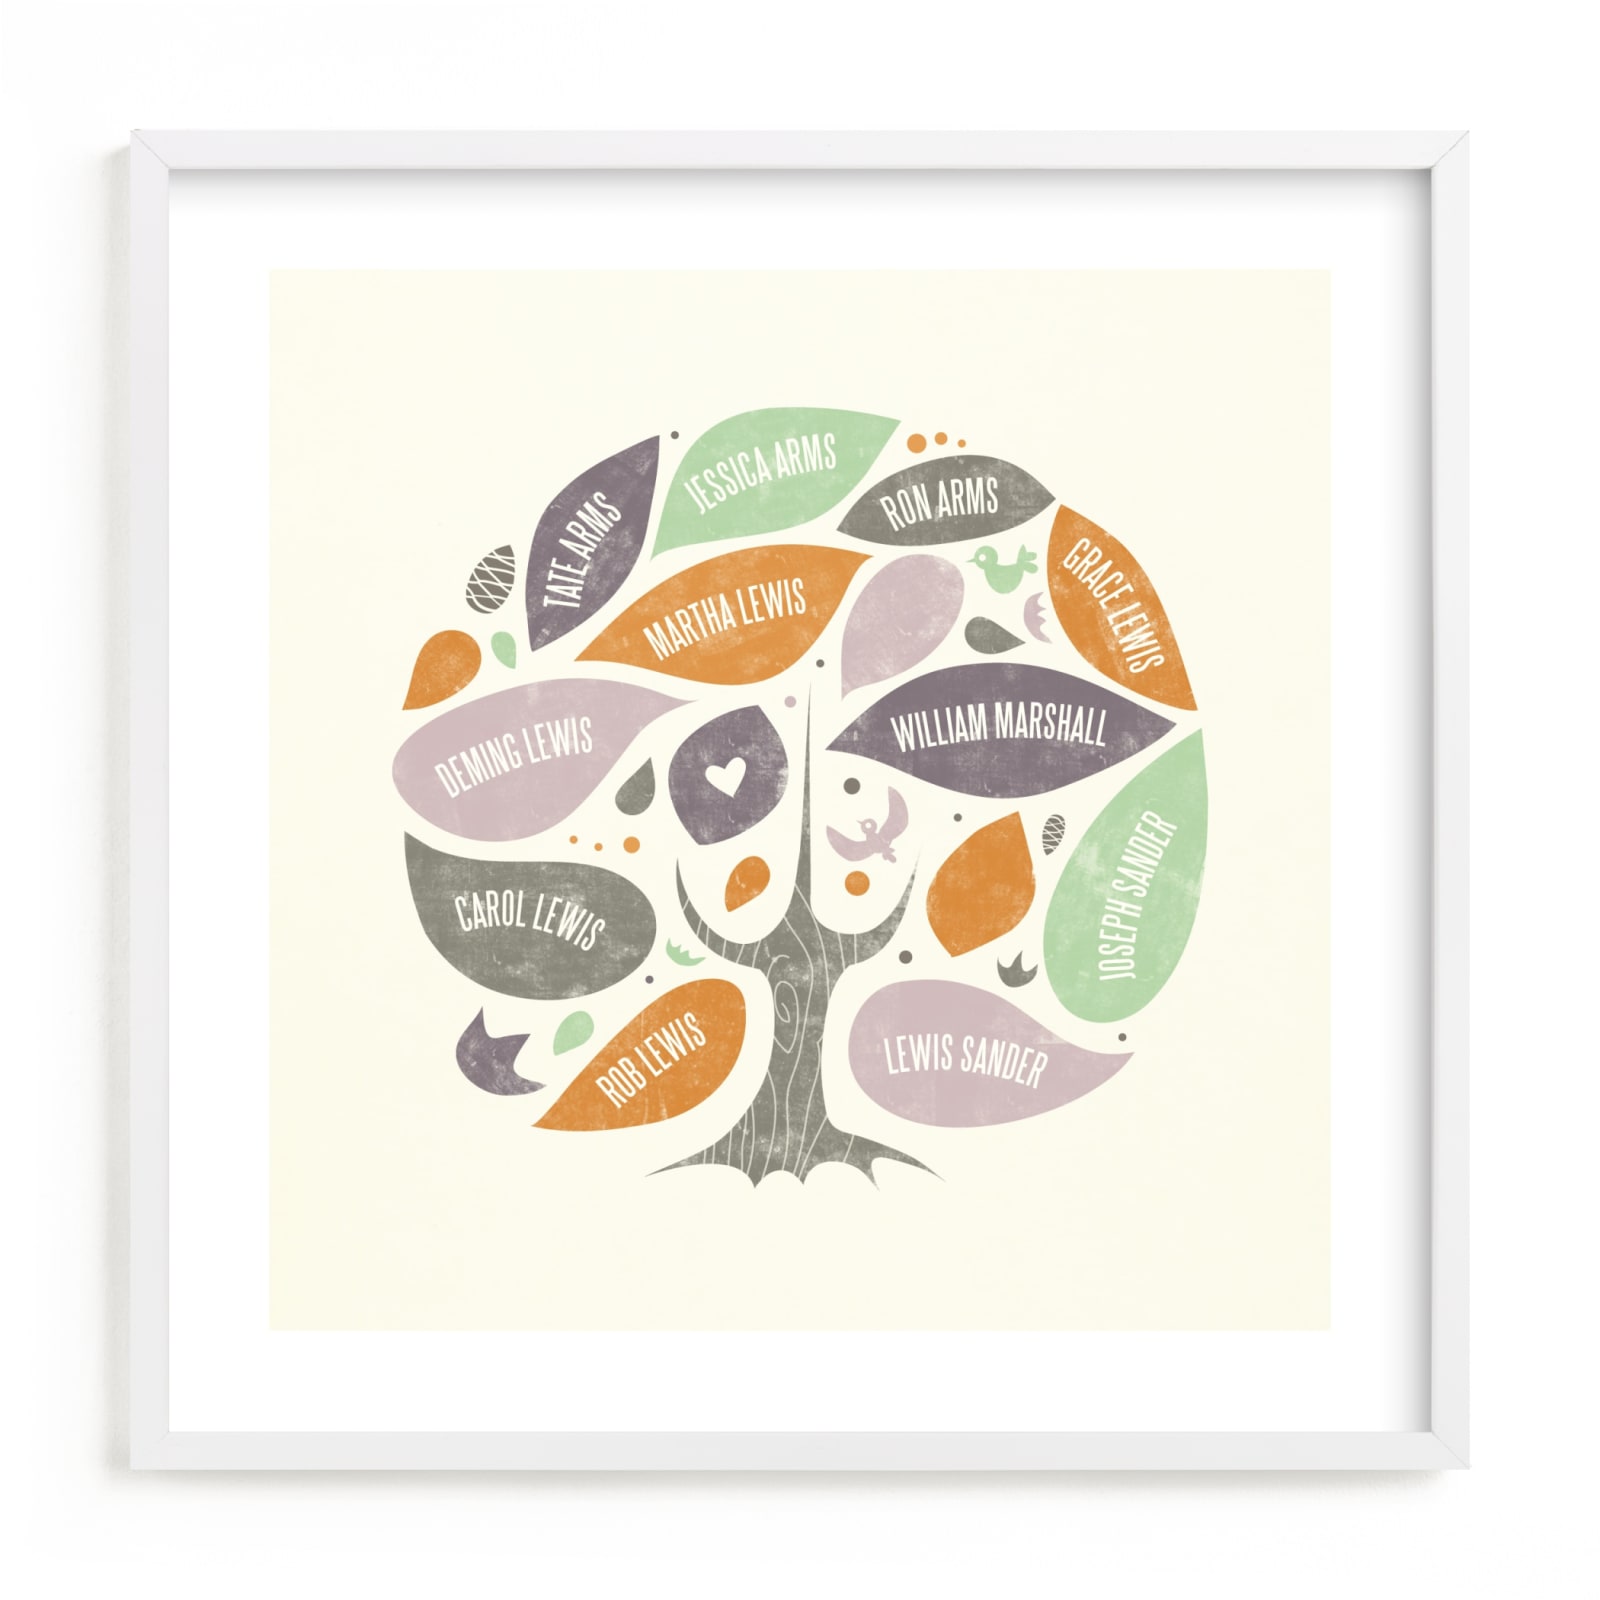 This is a orange family tree art by Heather Francisco called Folk Family Tree.